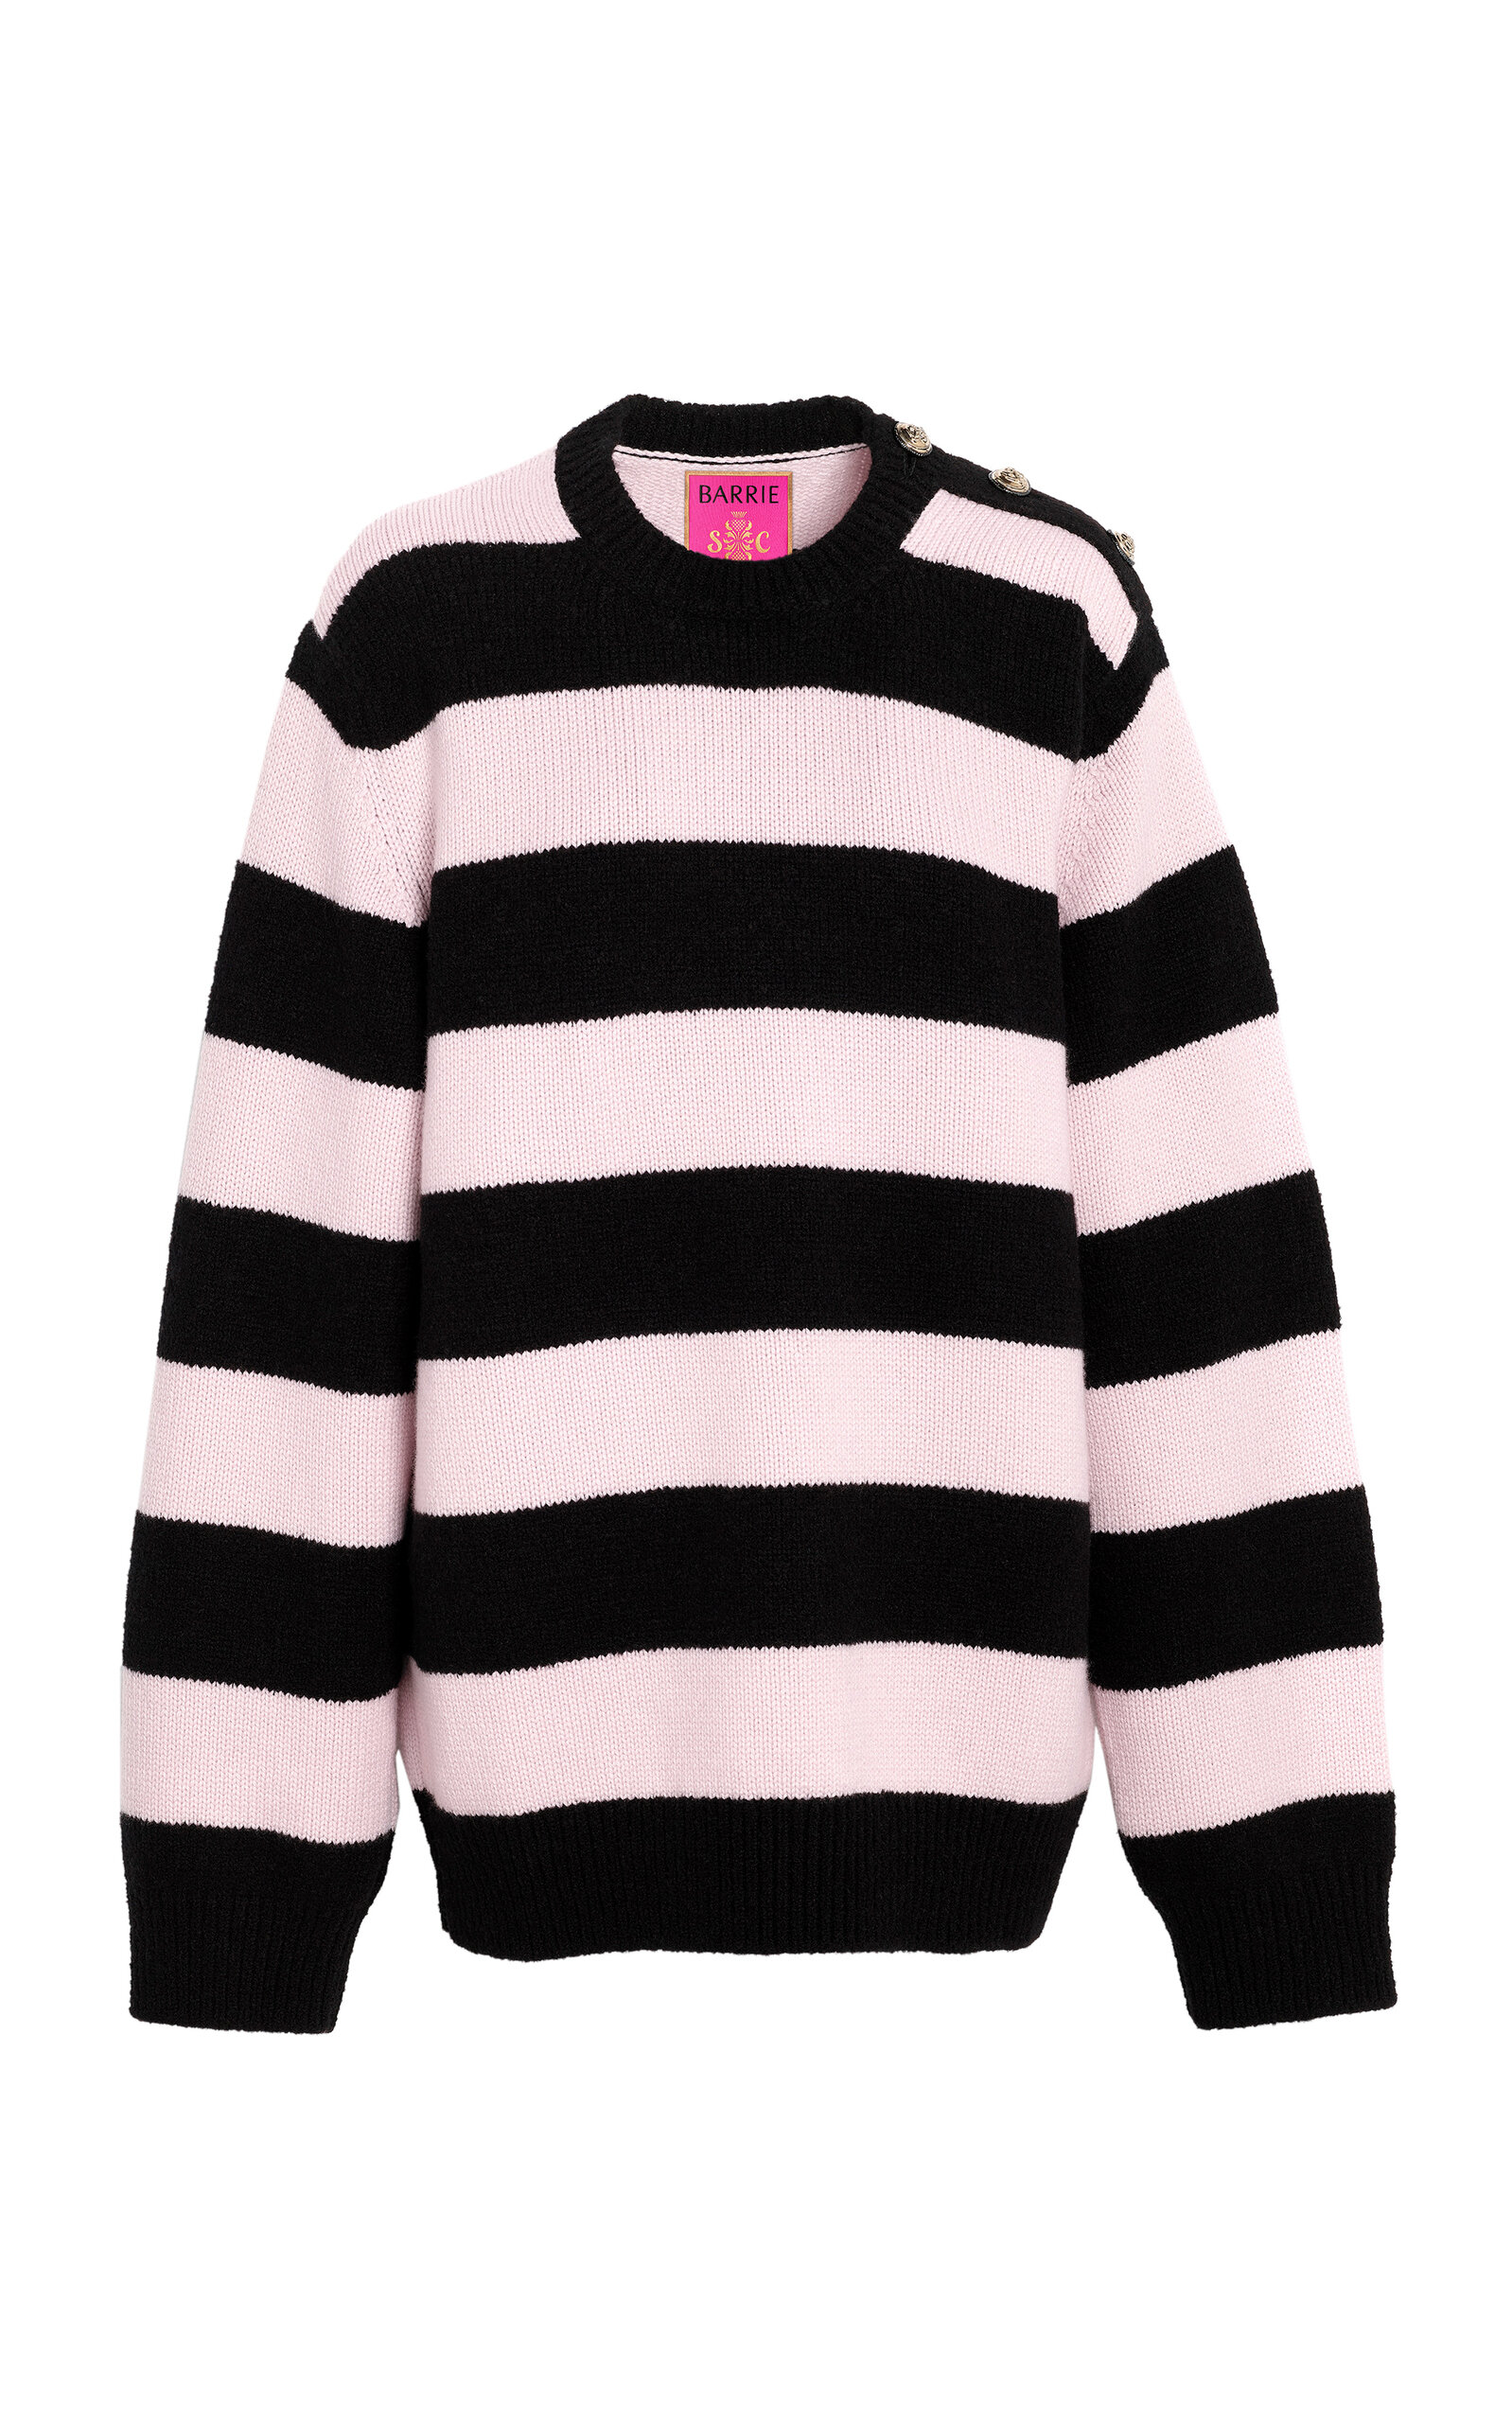 BARRIE BARRIE X SOFIA COPPOLA BUTTON DETAIL CASHMERE SWEATER